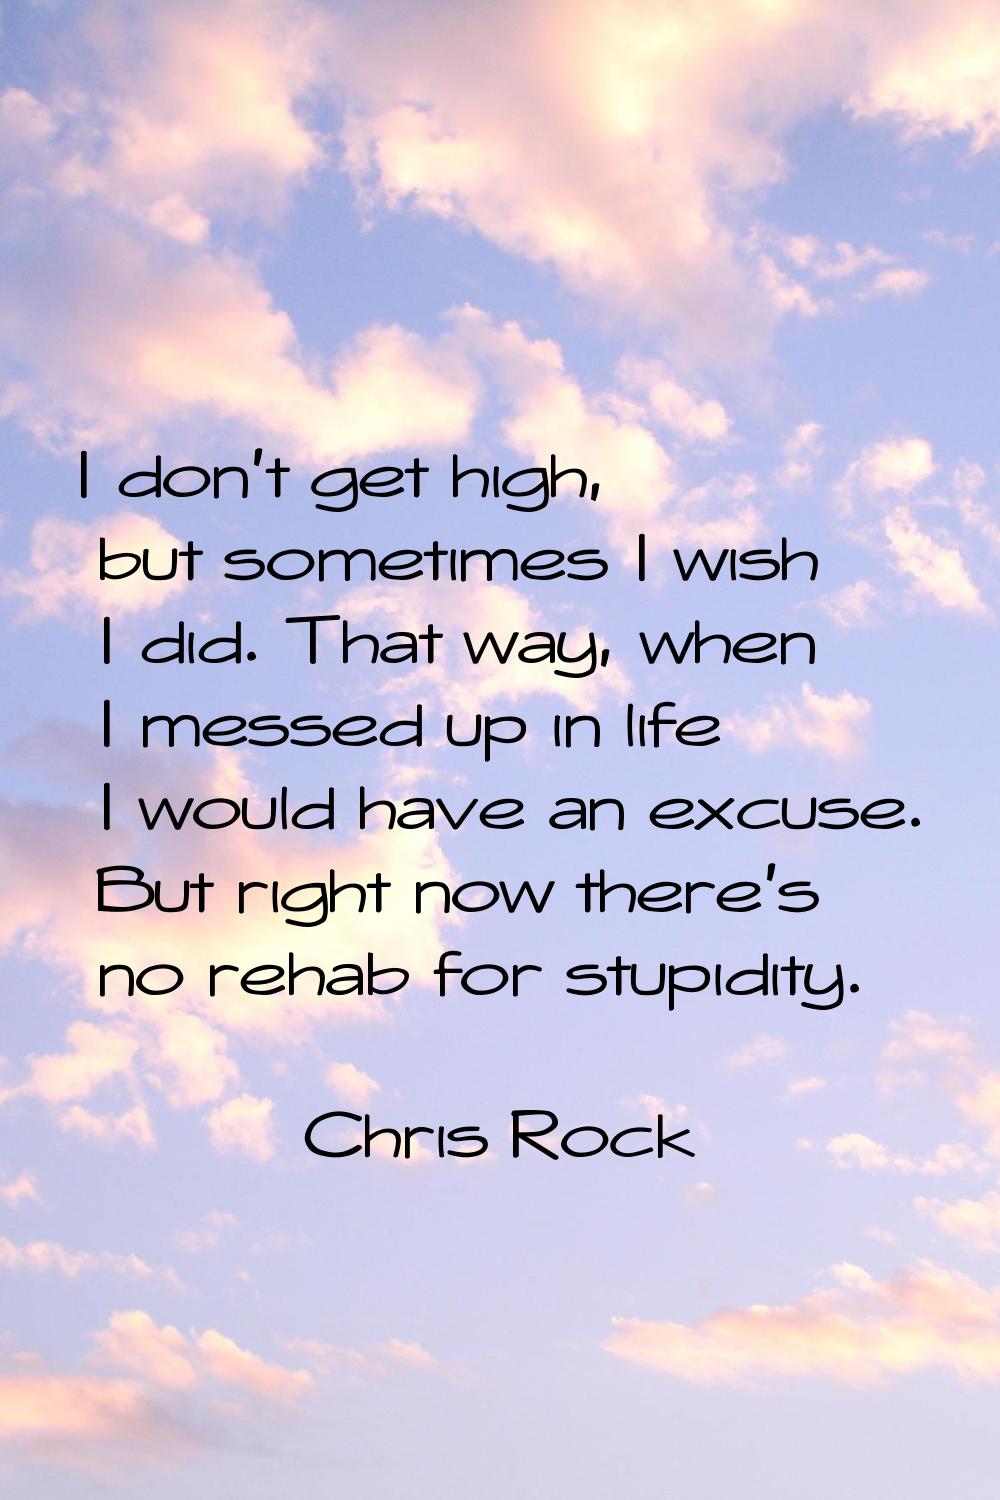 I don't get high, but sometimes I wish I did. That way, when I messed up in life I would have an ex